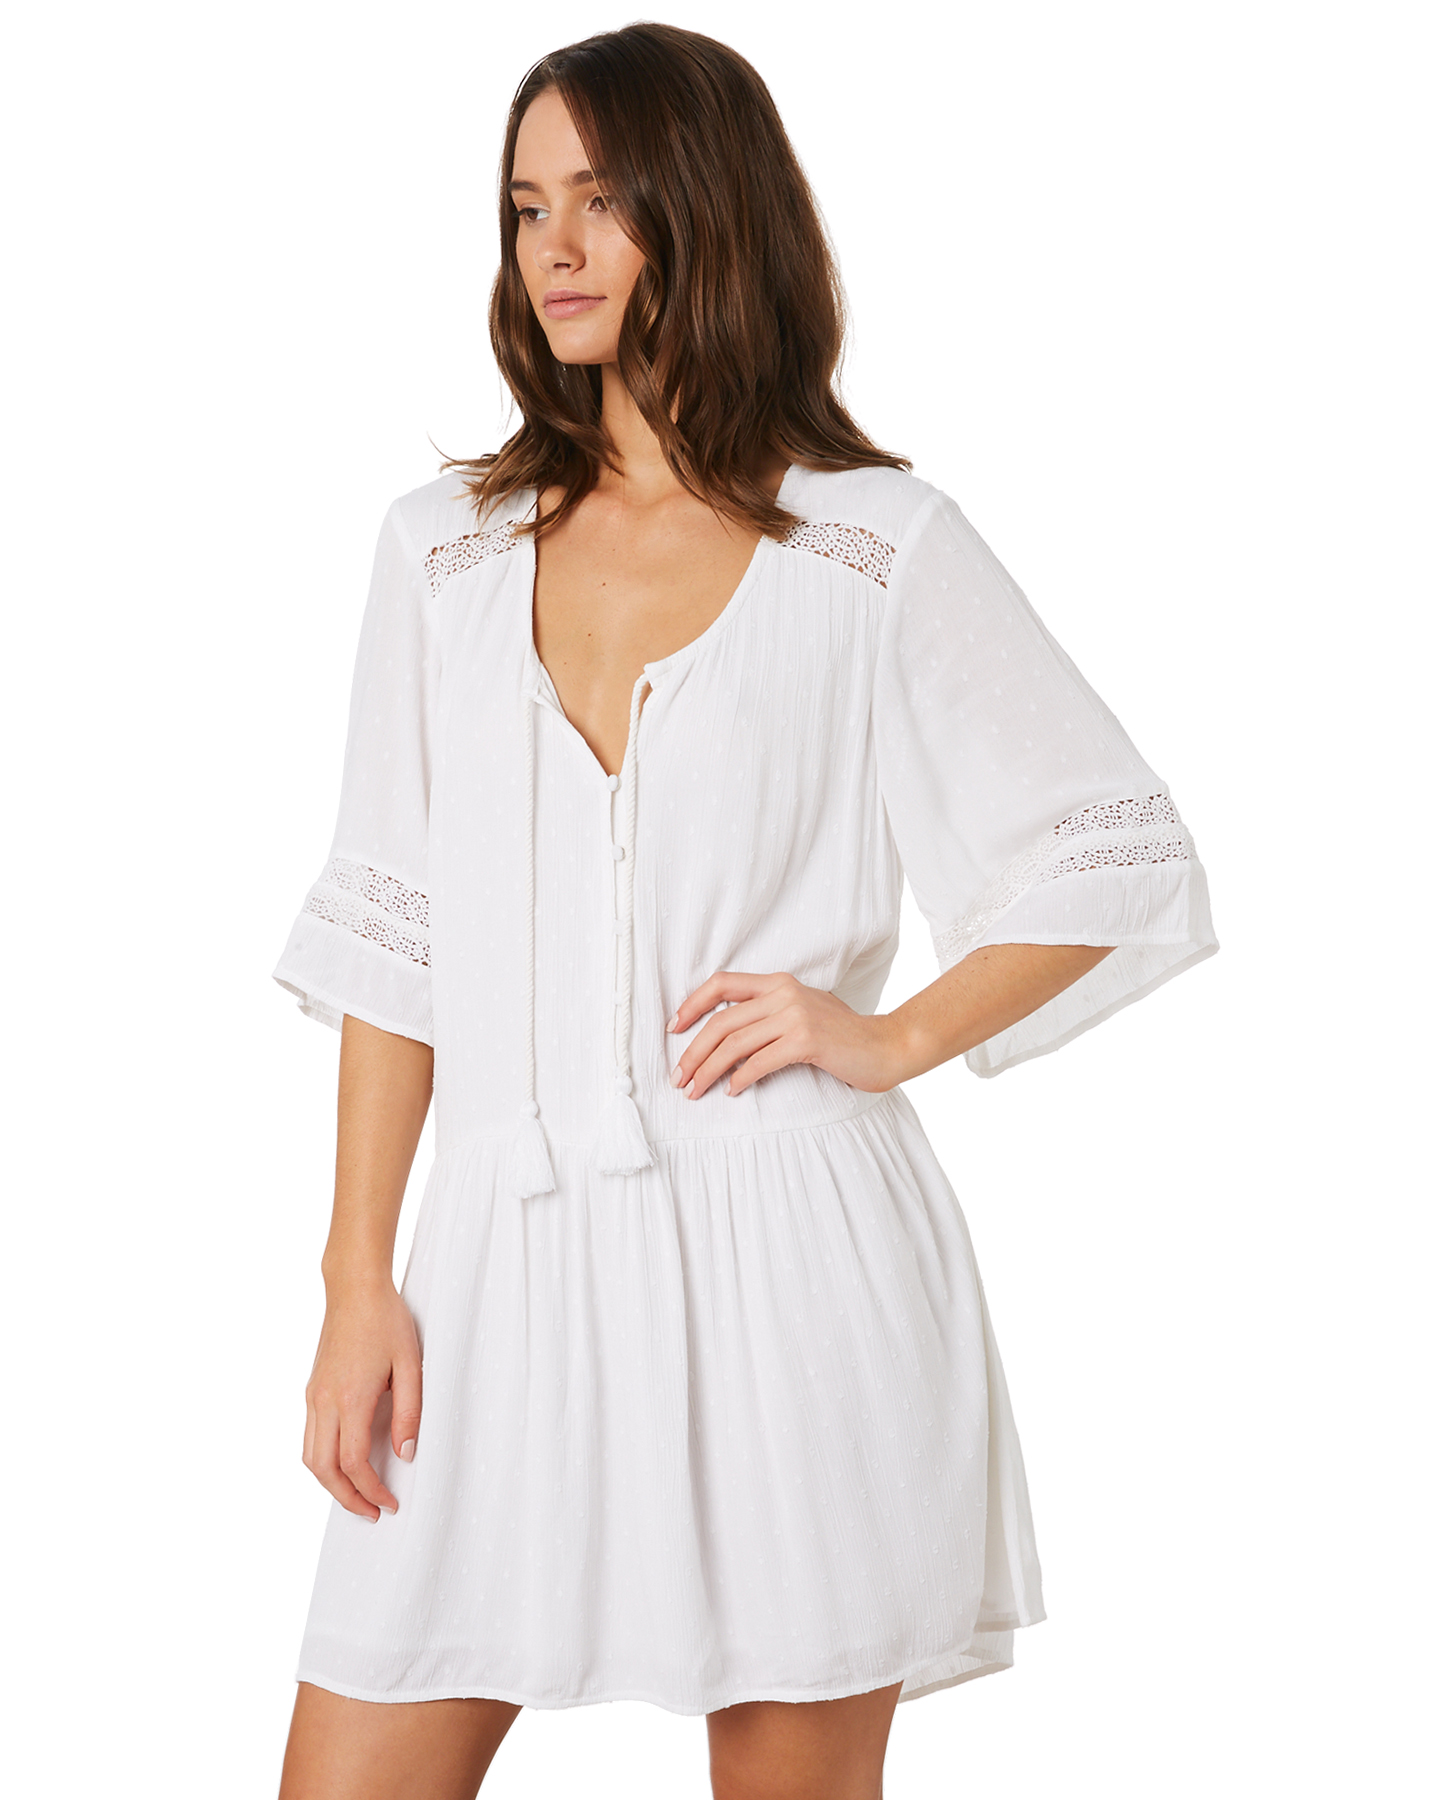 O'neill Eve Dress - White Out | SurfStitch